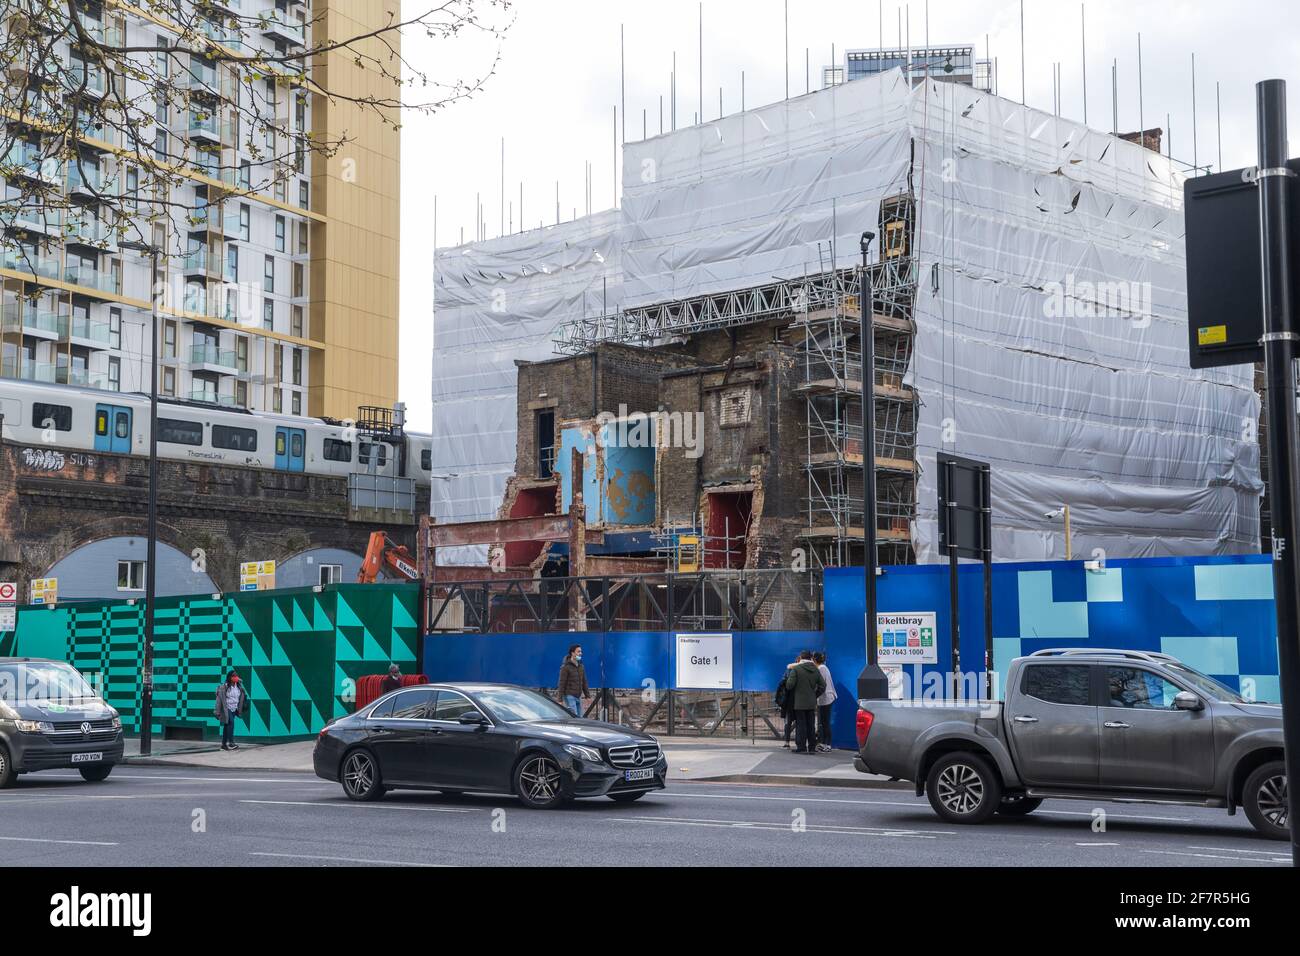 Demolition of the Elephant and Castle shopping centre, London Stock Photo